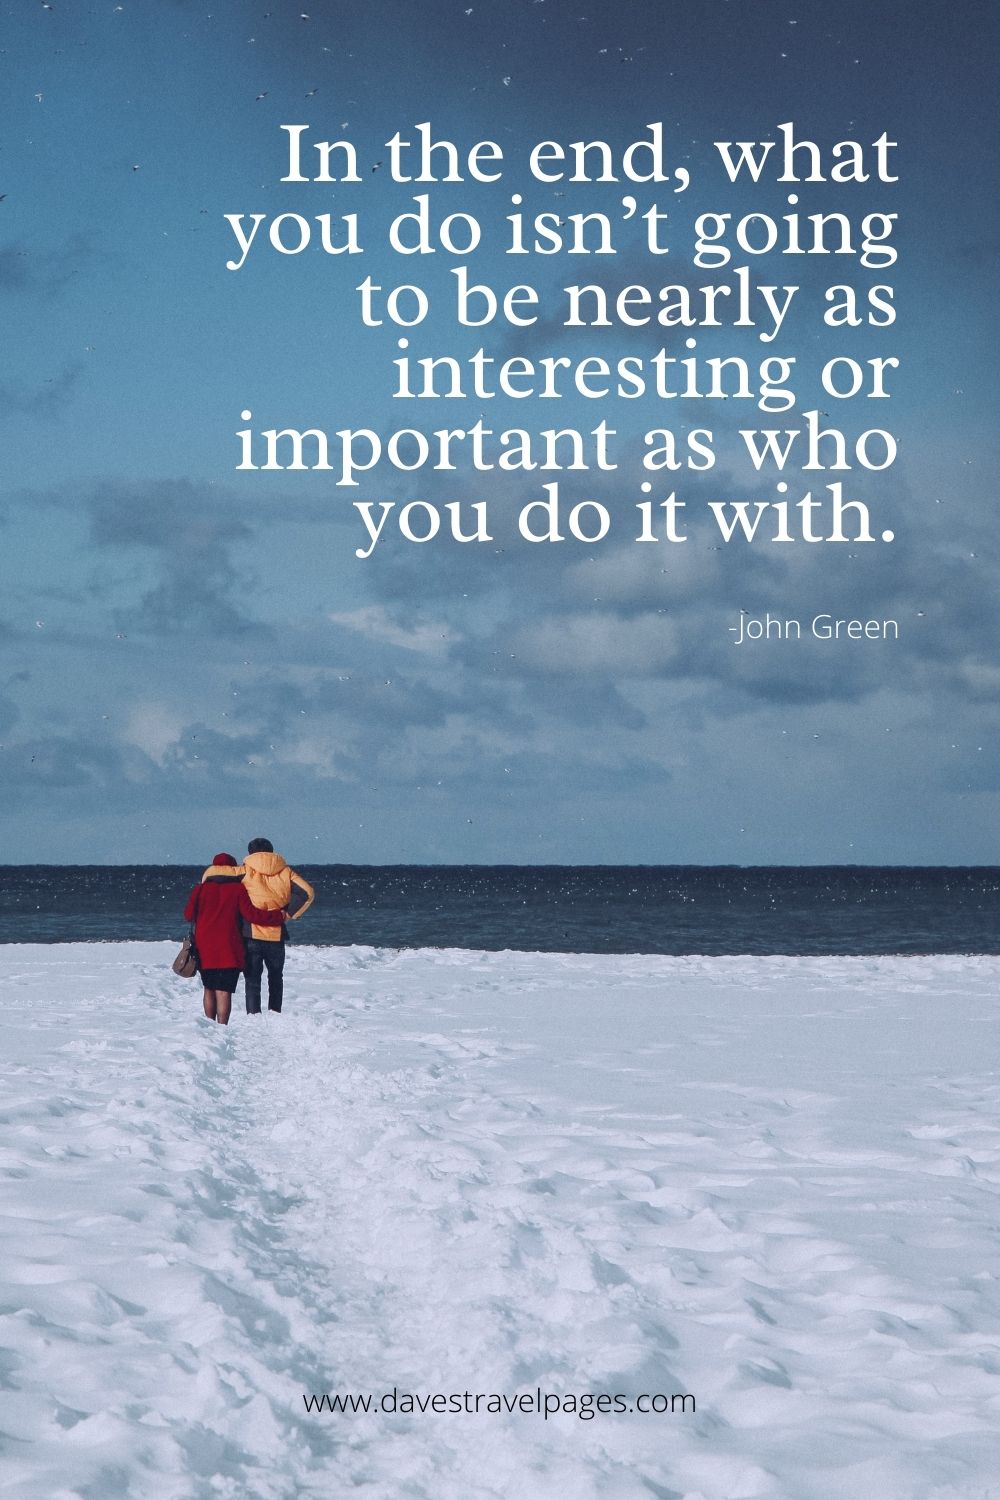 In the end, what you do isn’t going to be nearly as interesting or important as who you do it with.